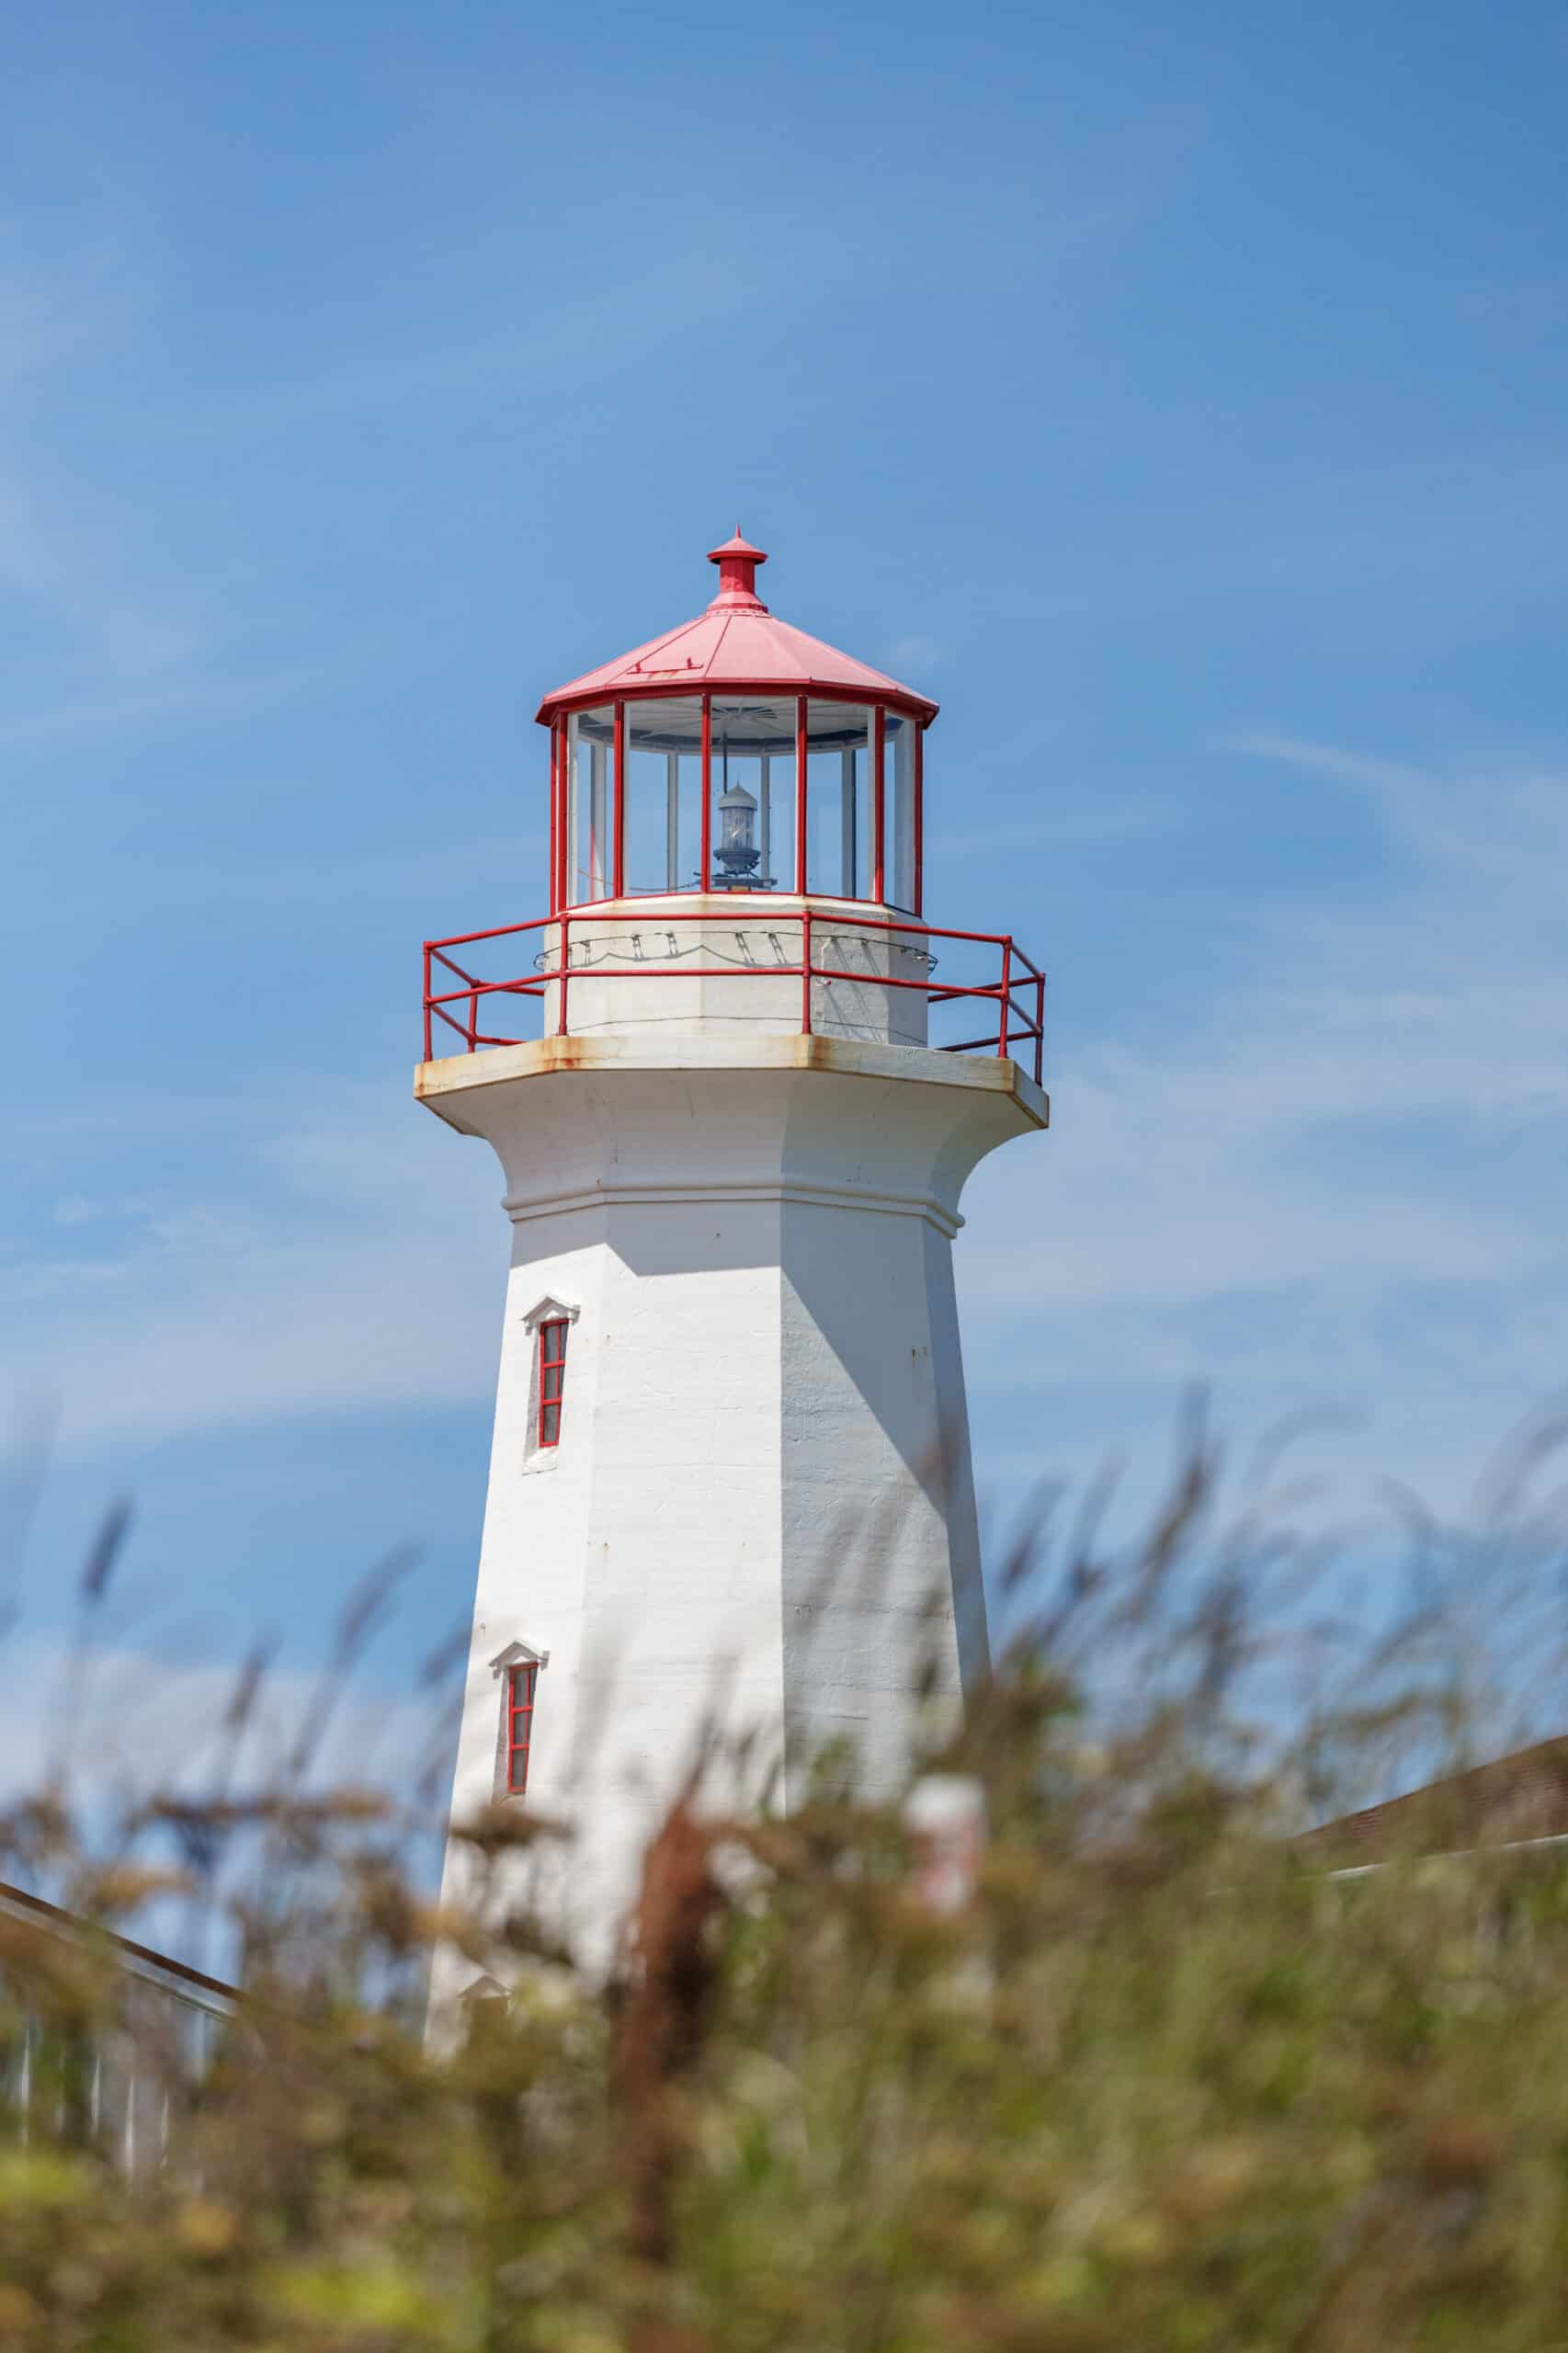 White lighthouse with red roof, railings, and window panes in Maine with blue skies in the background